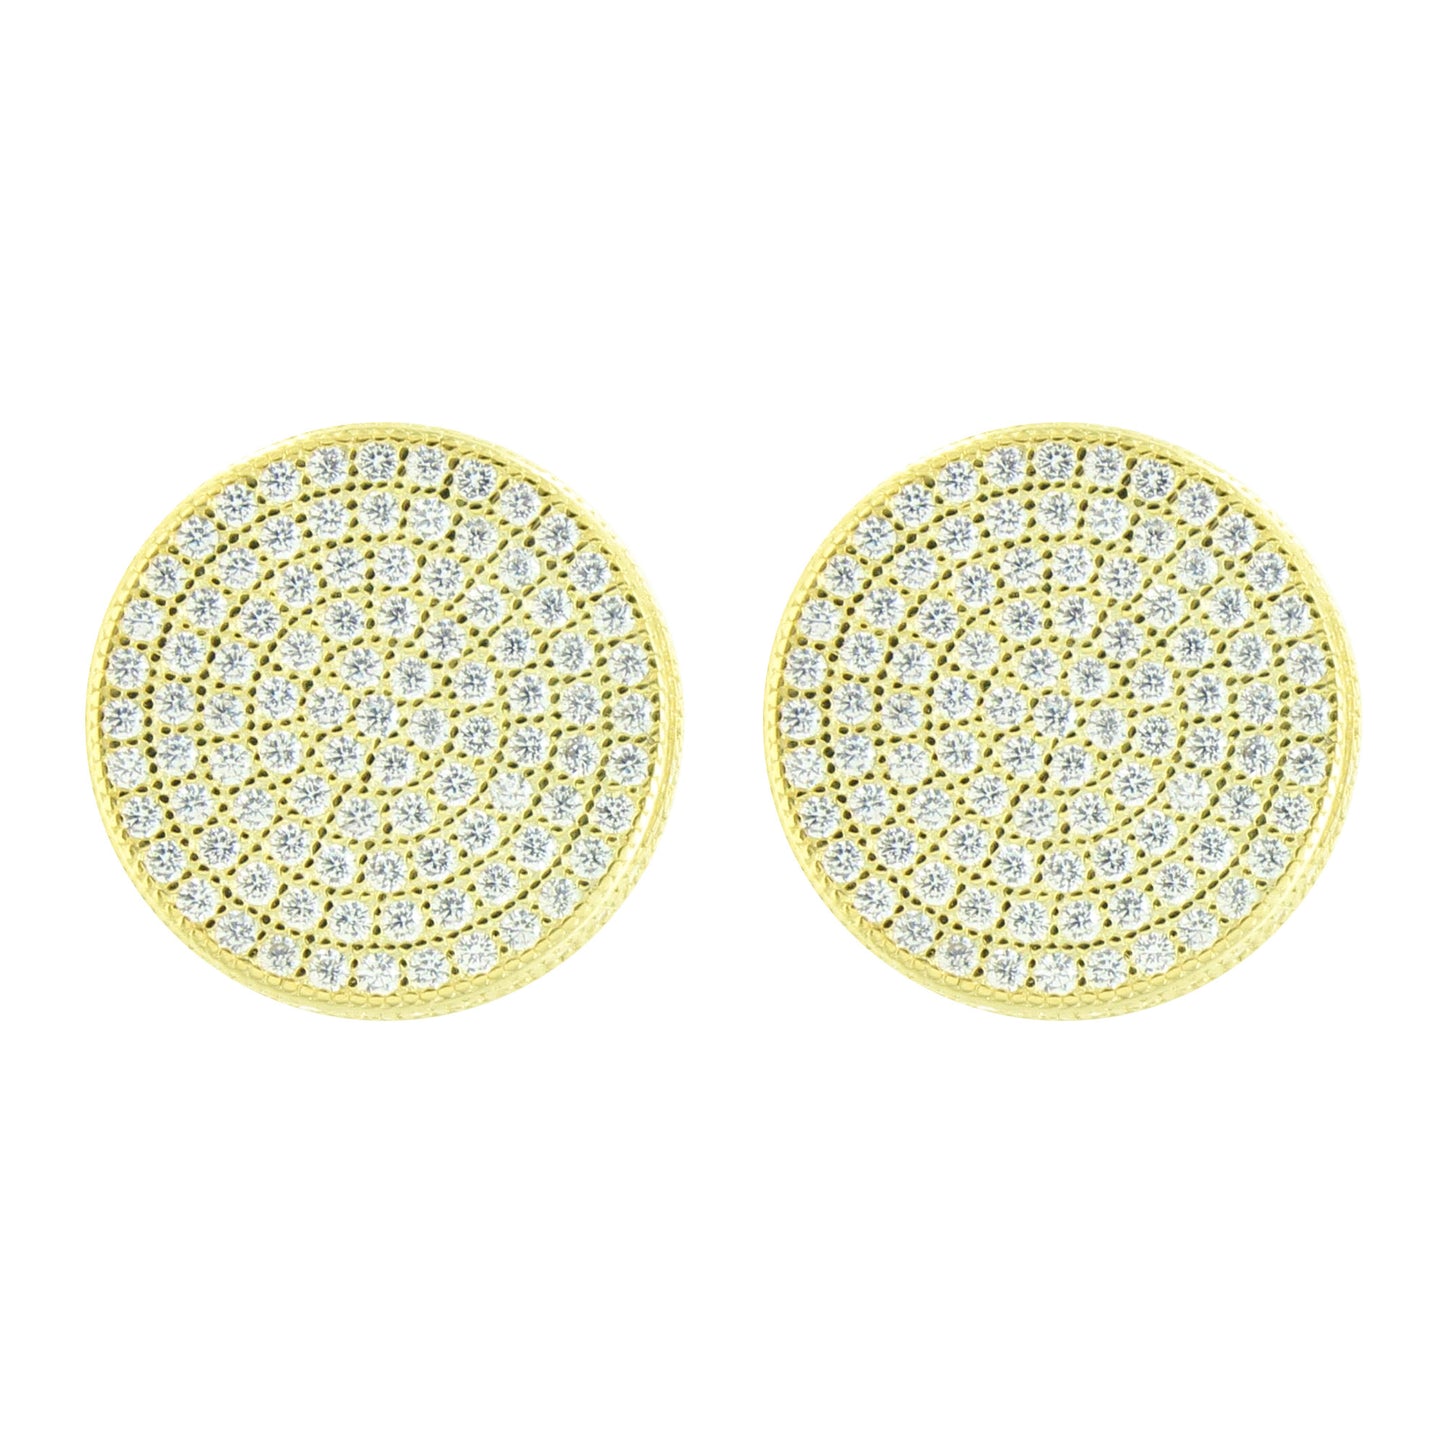 Gold Tone Round Earrings Sterling Silver